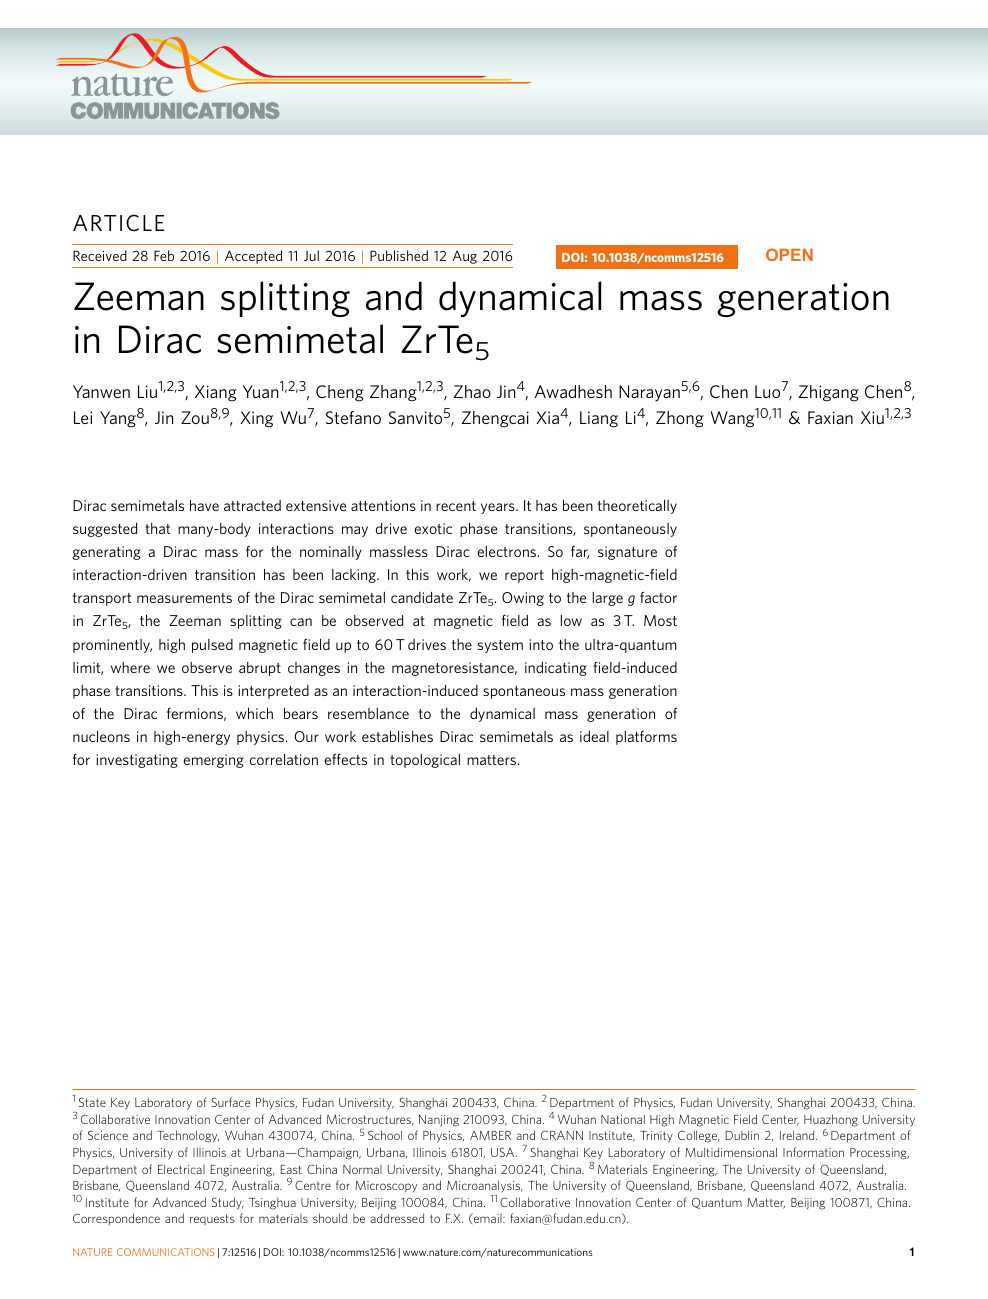 Zeeman Splitting And Dynamical Mass Generation In Dirac Semimetal Zrte5 Topic Of Research Paper In Nano Technology Download Scholarly Article Pdf And Read For Free On Cyberleninka Open Science Hub